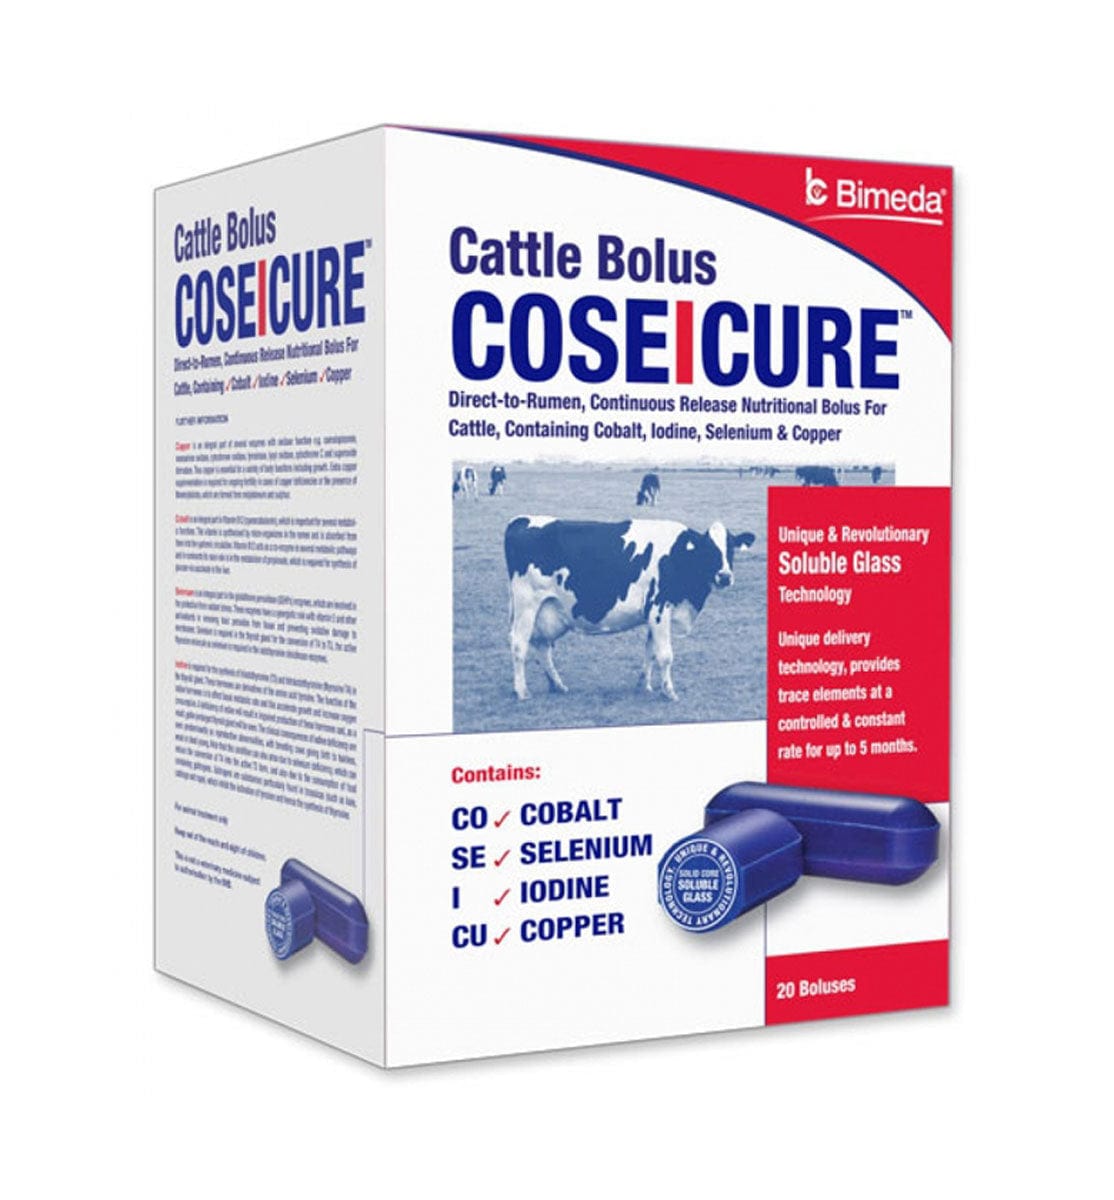 Cosecure cattle